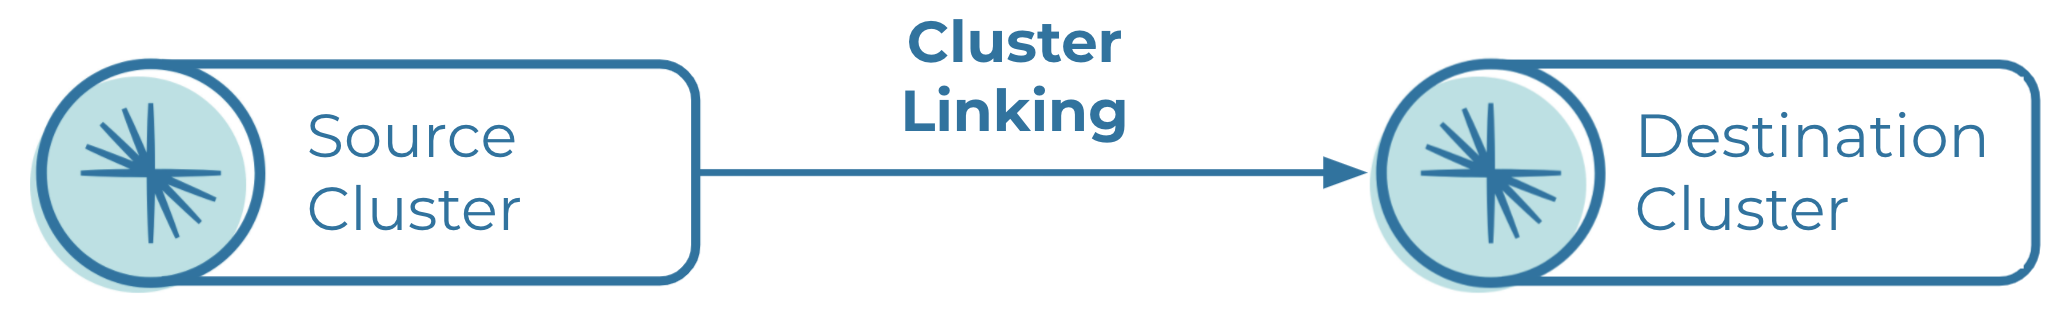 ../../_images/cloud-cluster-linking-overview.png